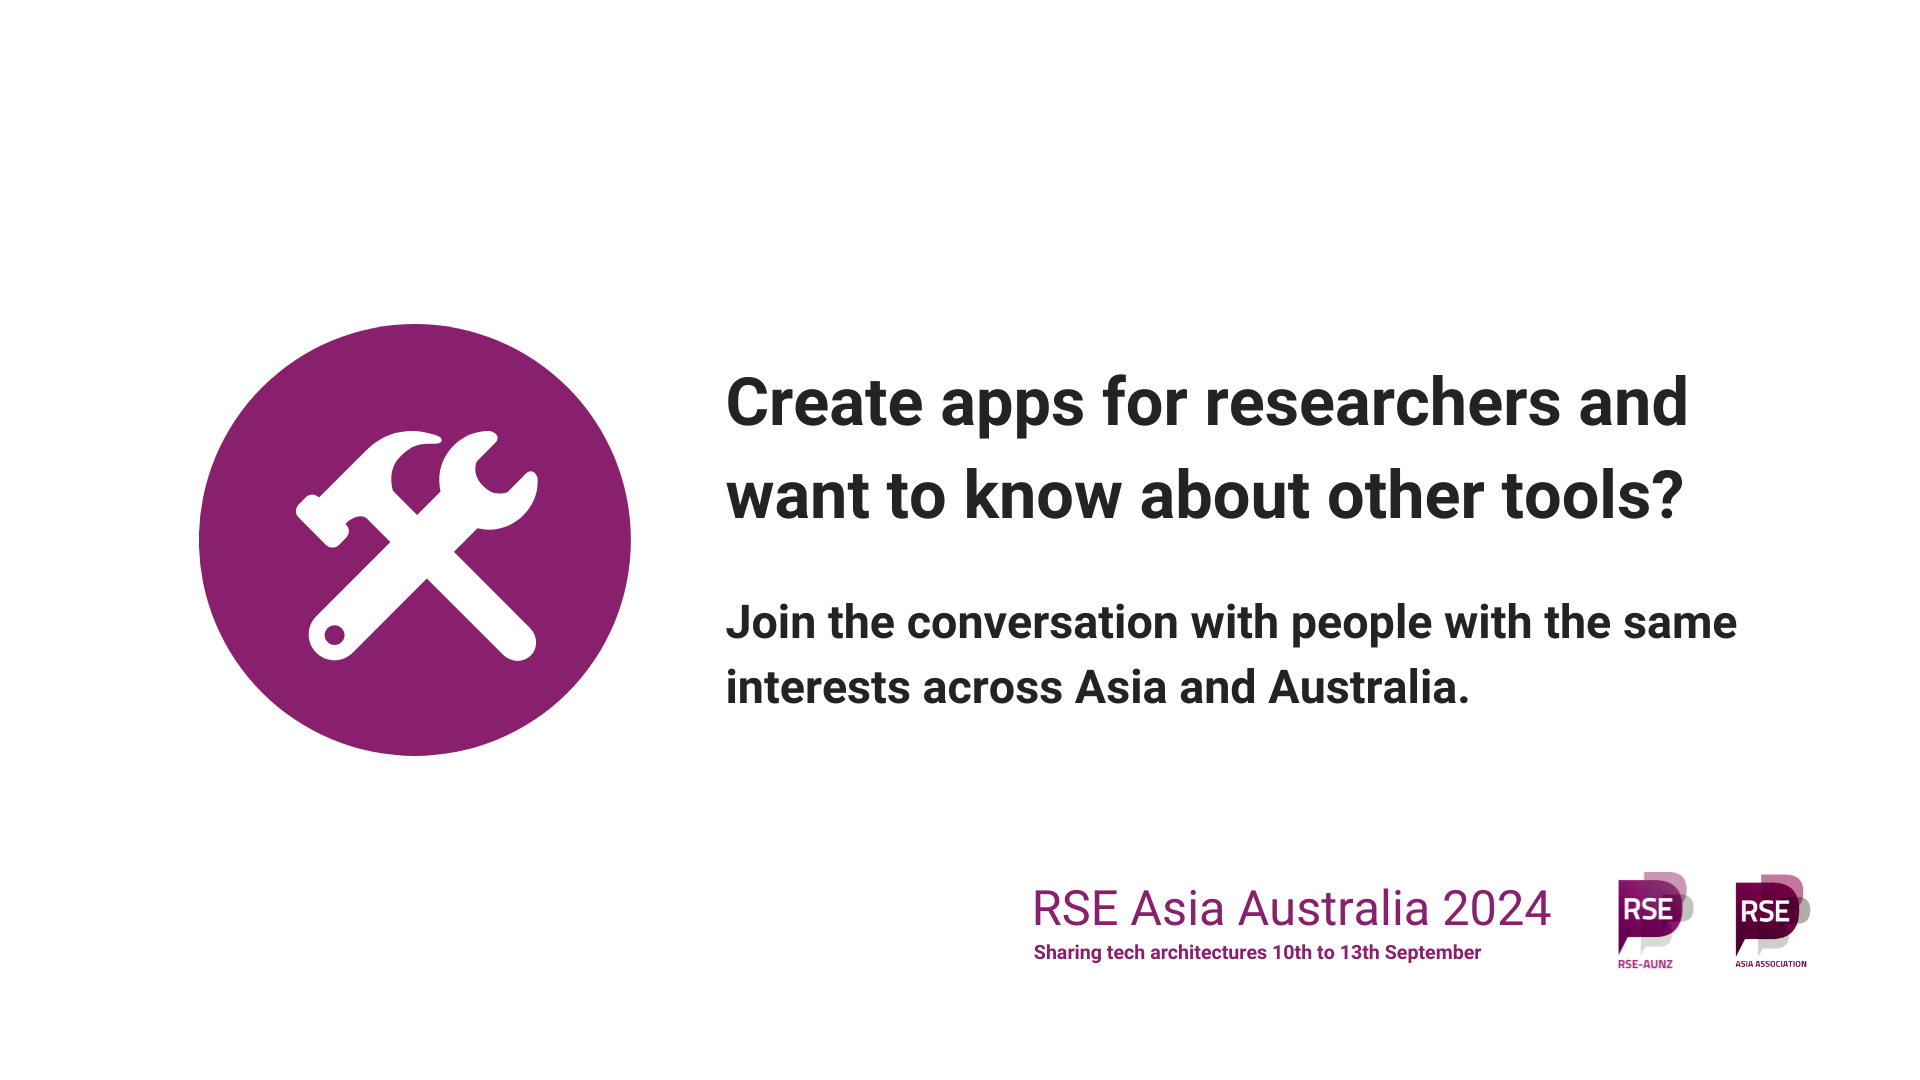 Hammer and spanner in purple circle. Create apps for researchers and want to know about other tools? Join the conversation with people with the same interests across Asia and Australia. RSE Asia Australia 2024. Sharing tech architectures. 10th to 13th September. Logos of RSE AUNZ and RSE Asia.